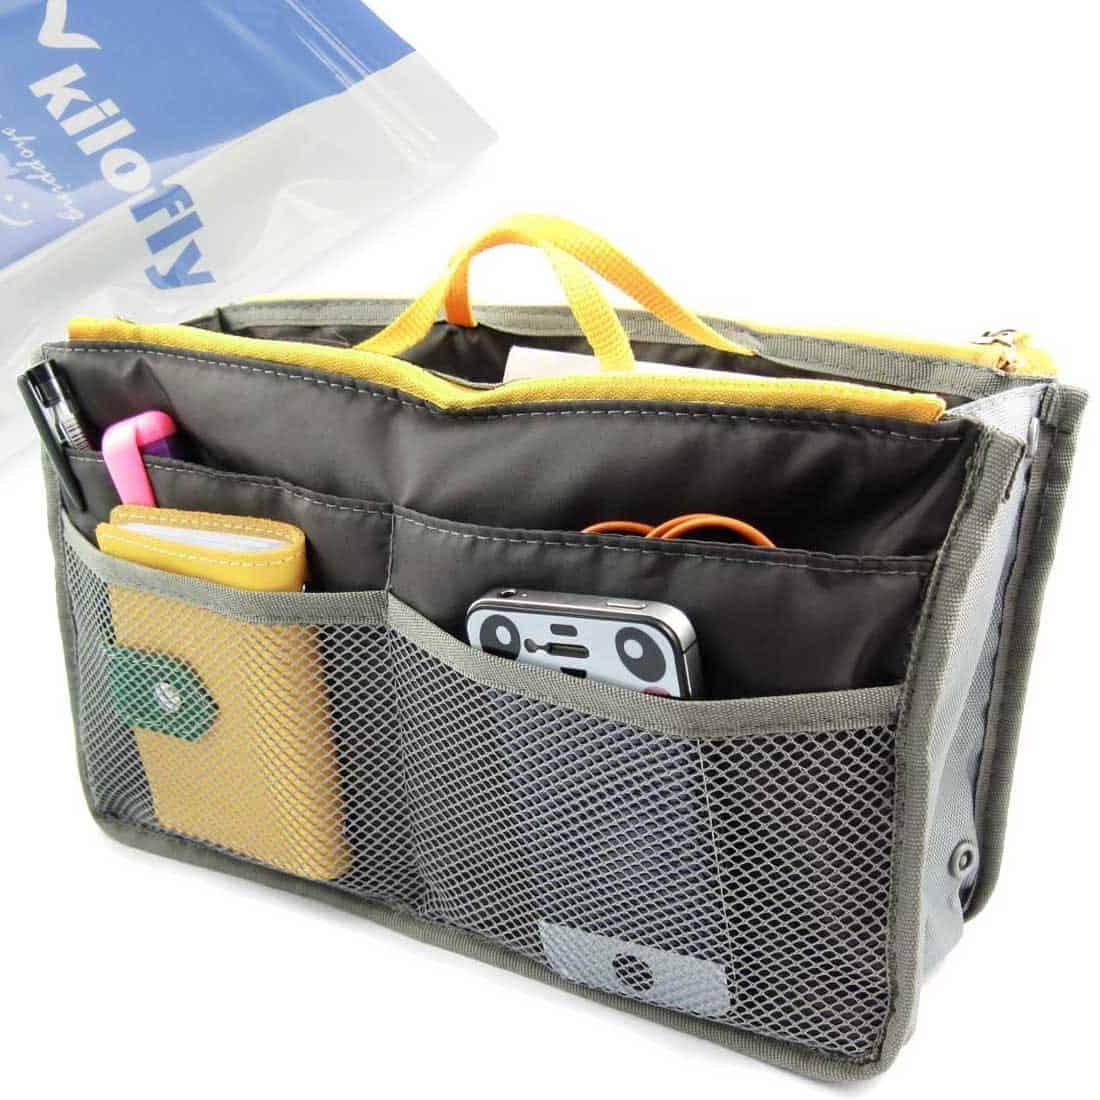 Amazon: Purse Insert Organizer Expandable With Handles Only $3.97 Shipped